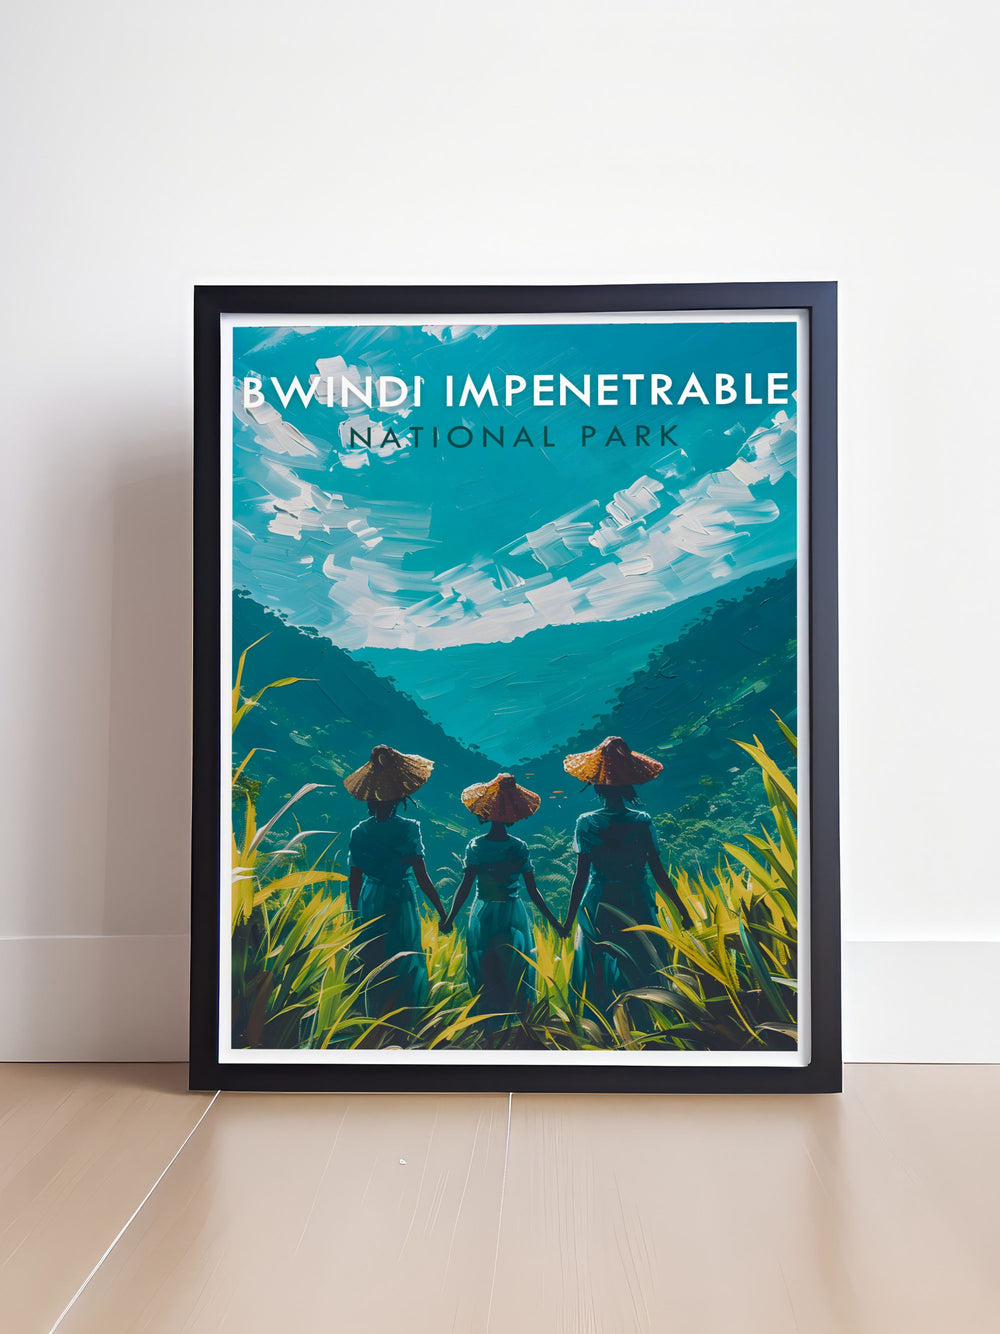 This travel poster showcases the dense forests of Bwindi Impenetrable National Park, highlighting the rich biodiversity and vibrant greenery that make this Ugandan treasure a must visit destination.